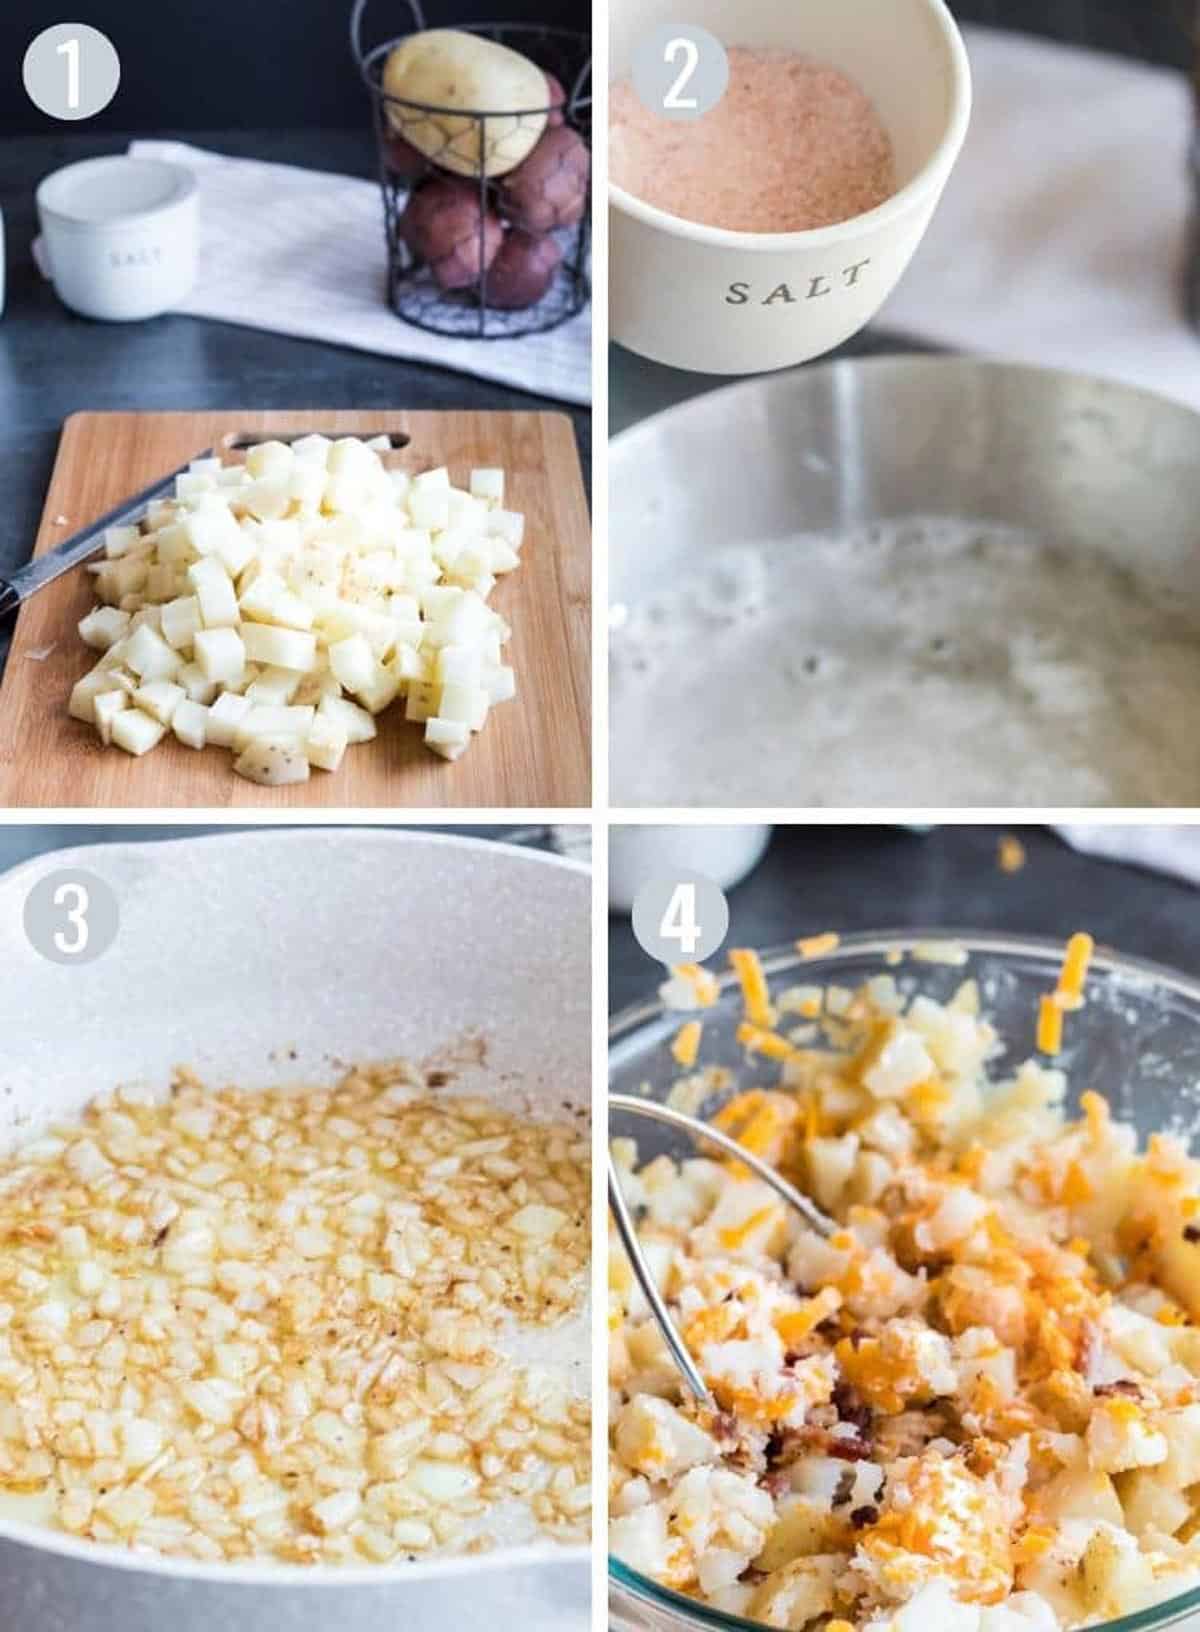 Chopping up potatoes and adding them to a mixing bowl.